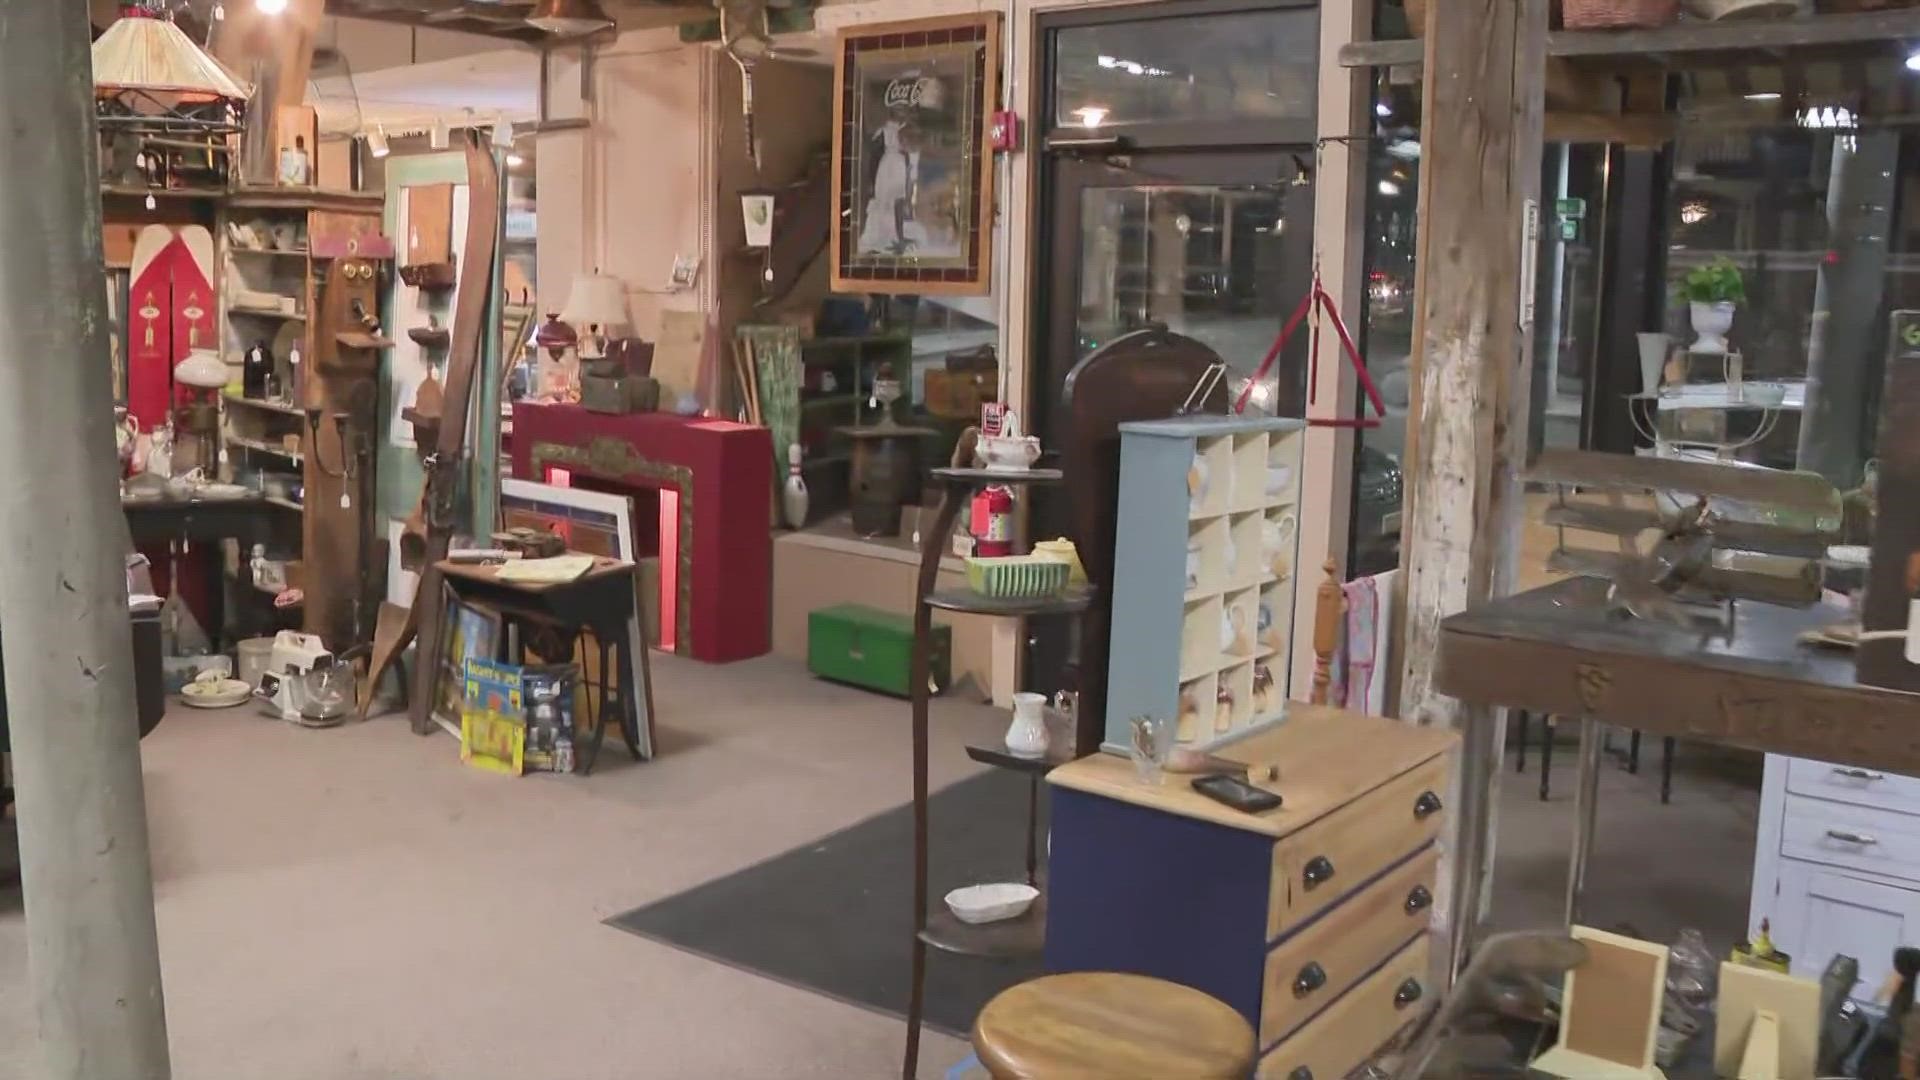 More than 16,000 square feet of antique treasures in Arcade, NY